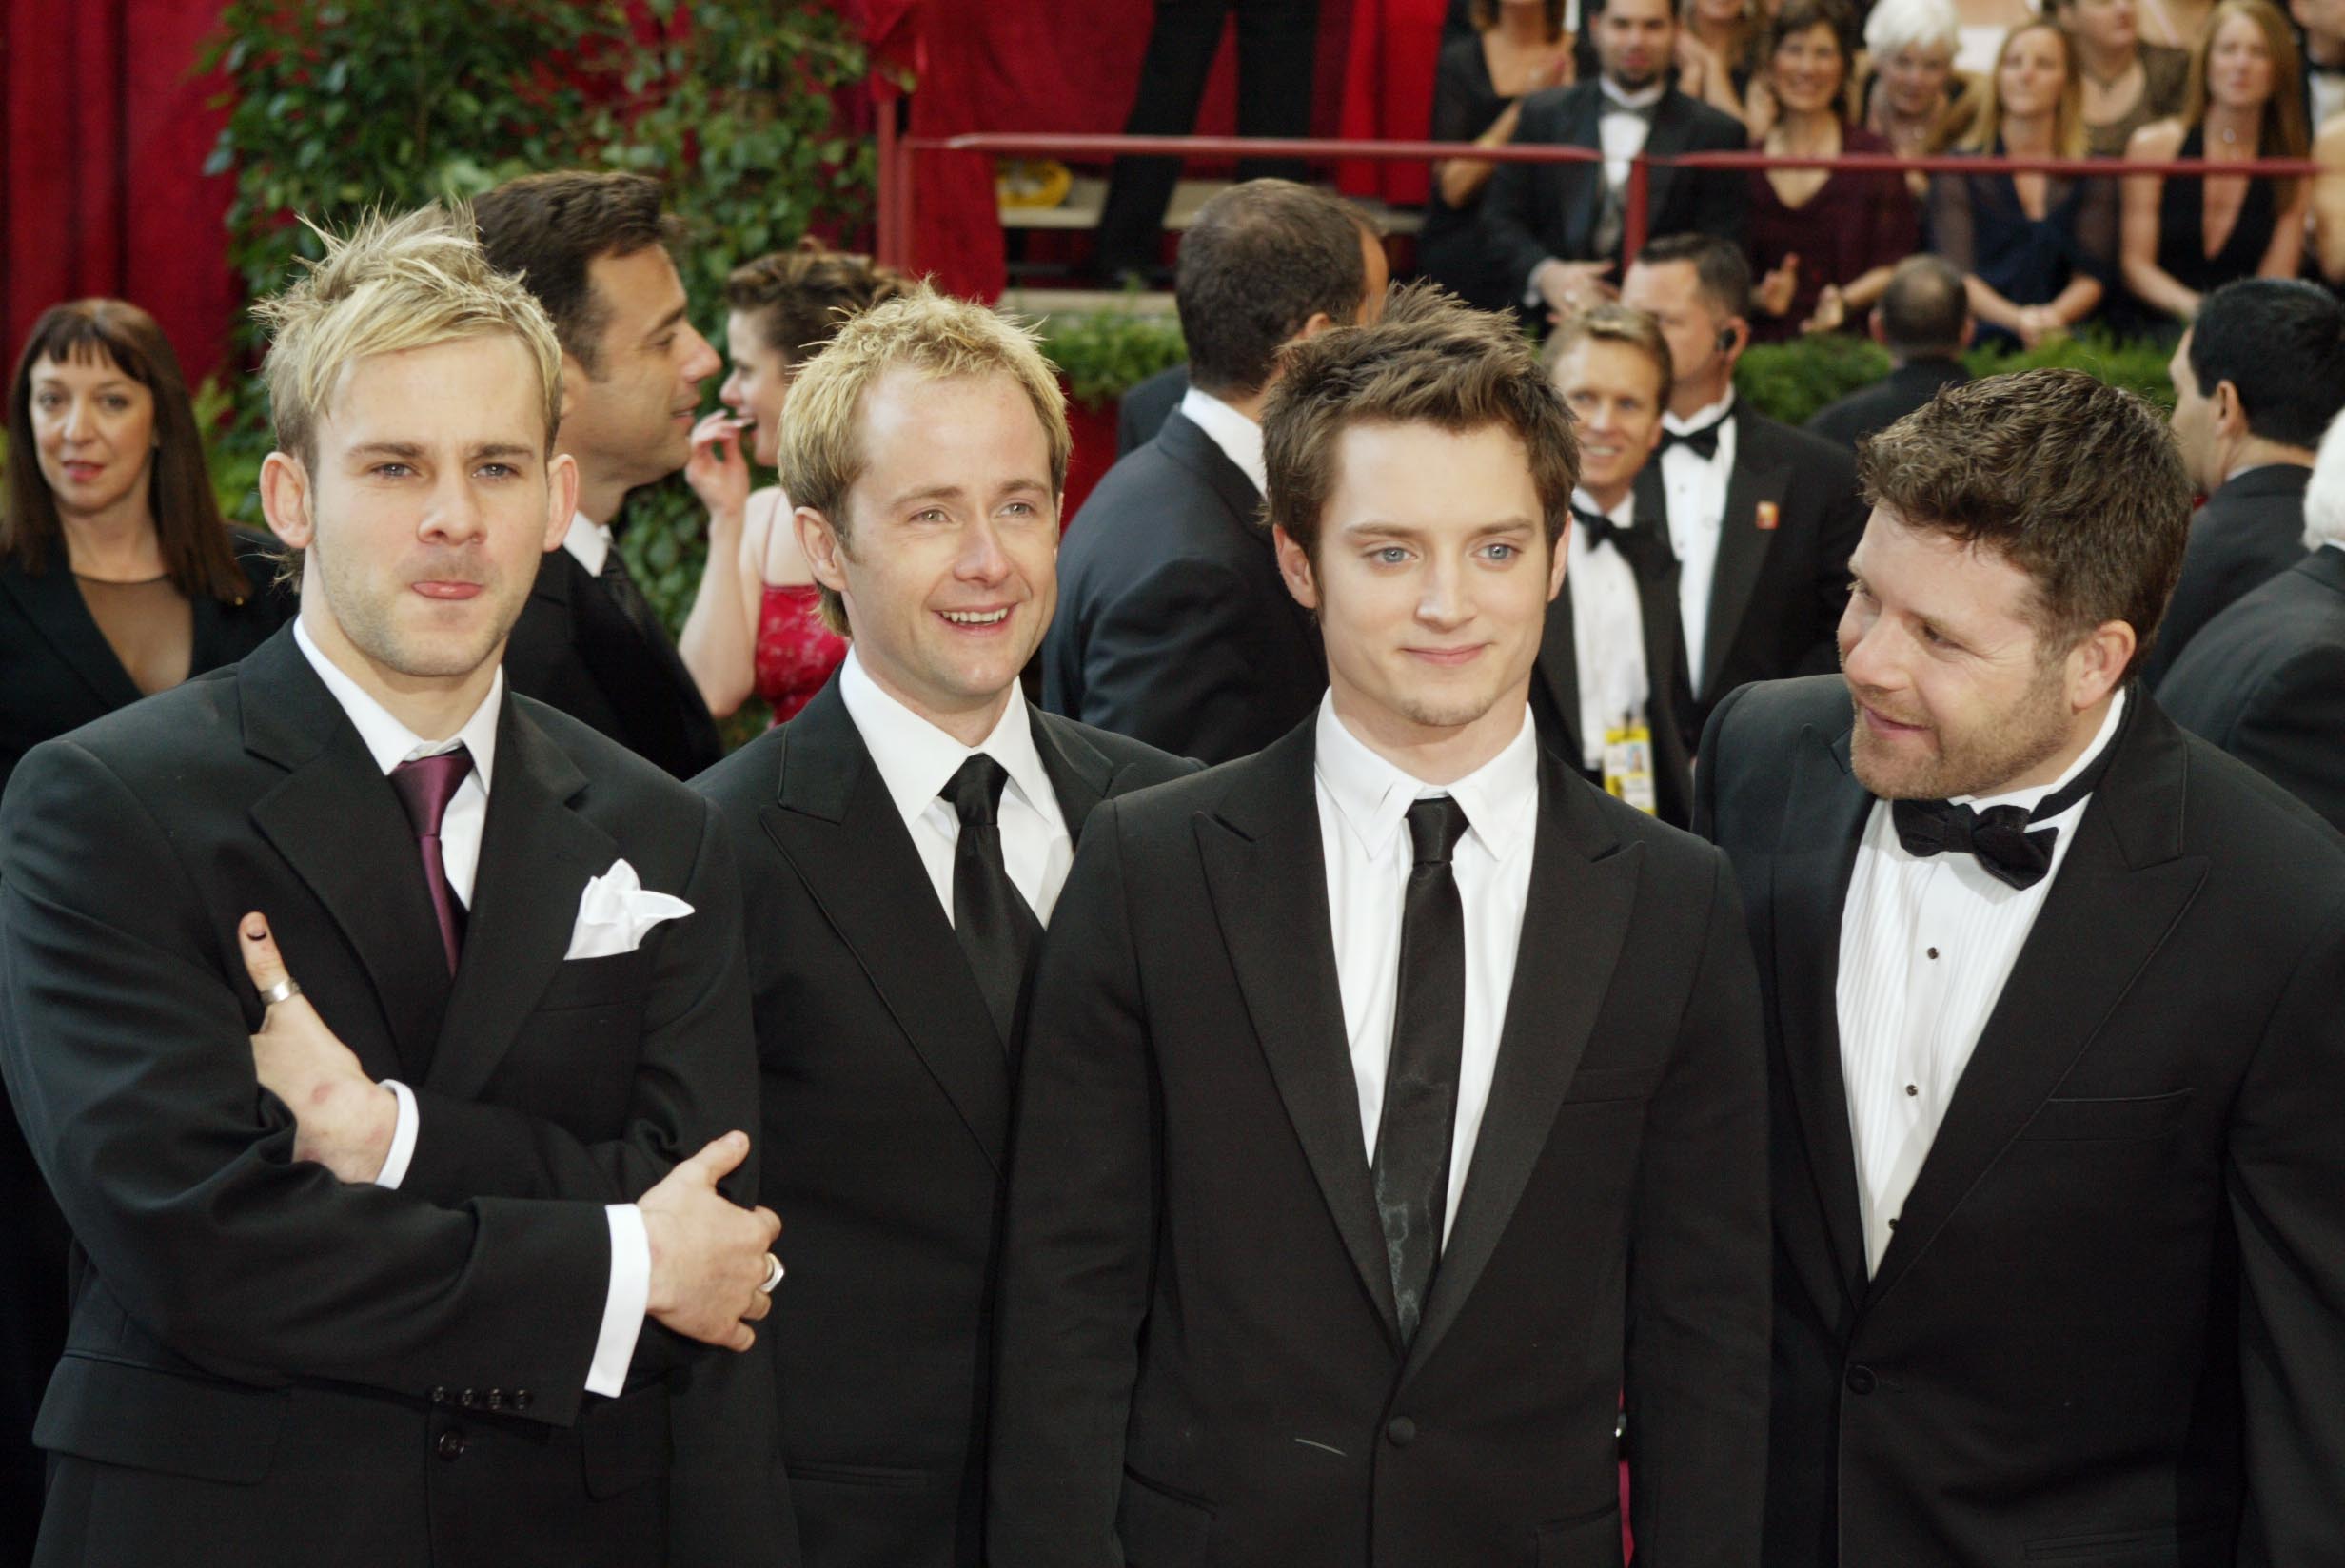 'The Lord of the Rings' stars Dominic Monaghan, Billy Boyd, Elijah Wood, and Sean Astin at the 2004 Oscars. They're standing next to one another and all wearing black suits.